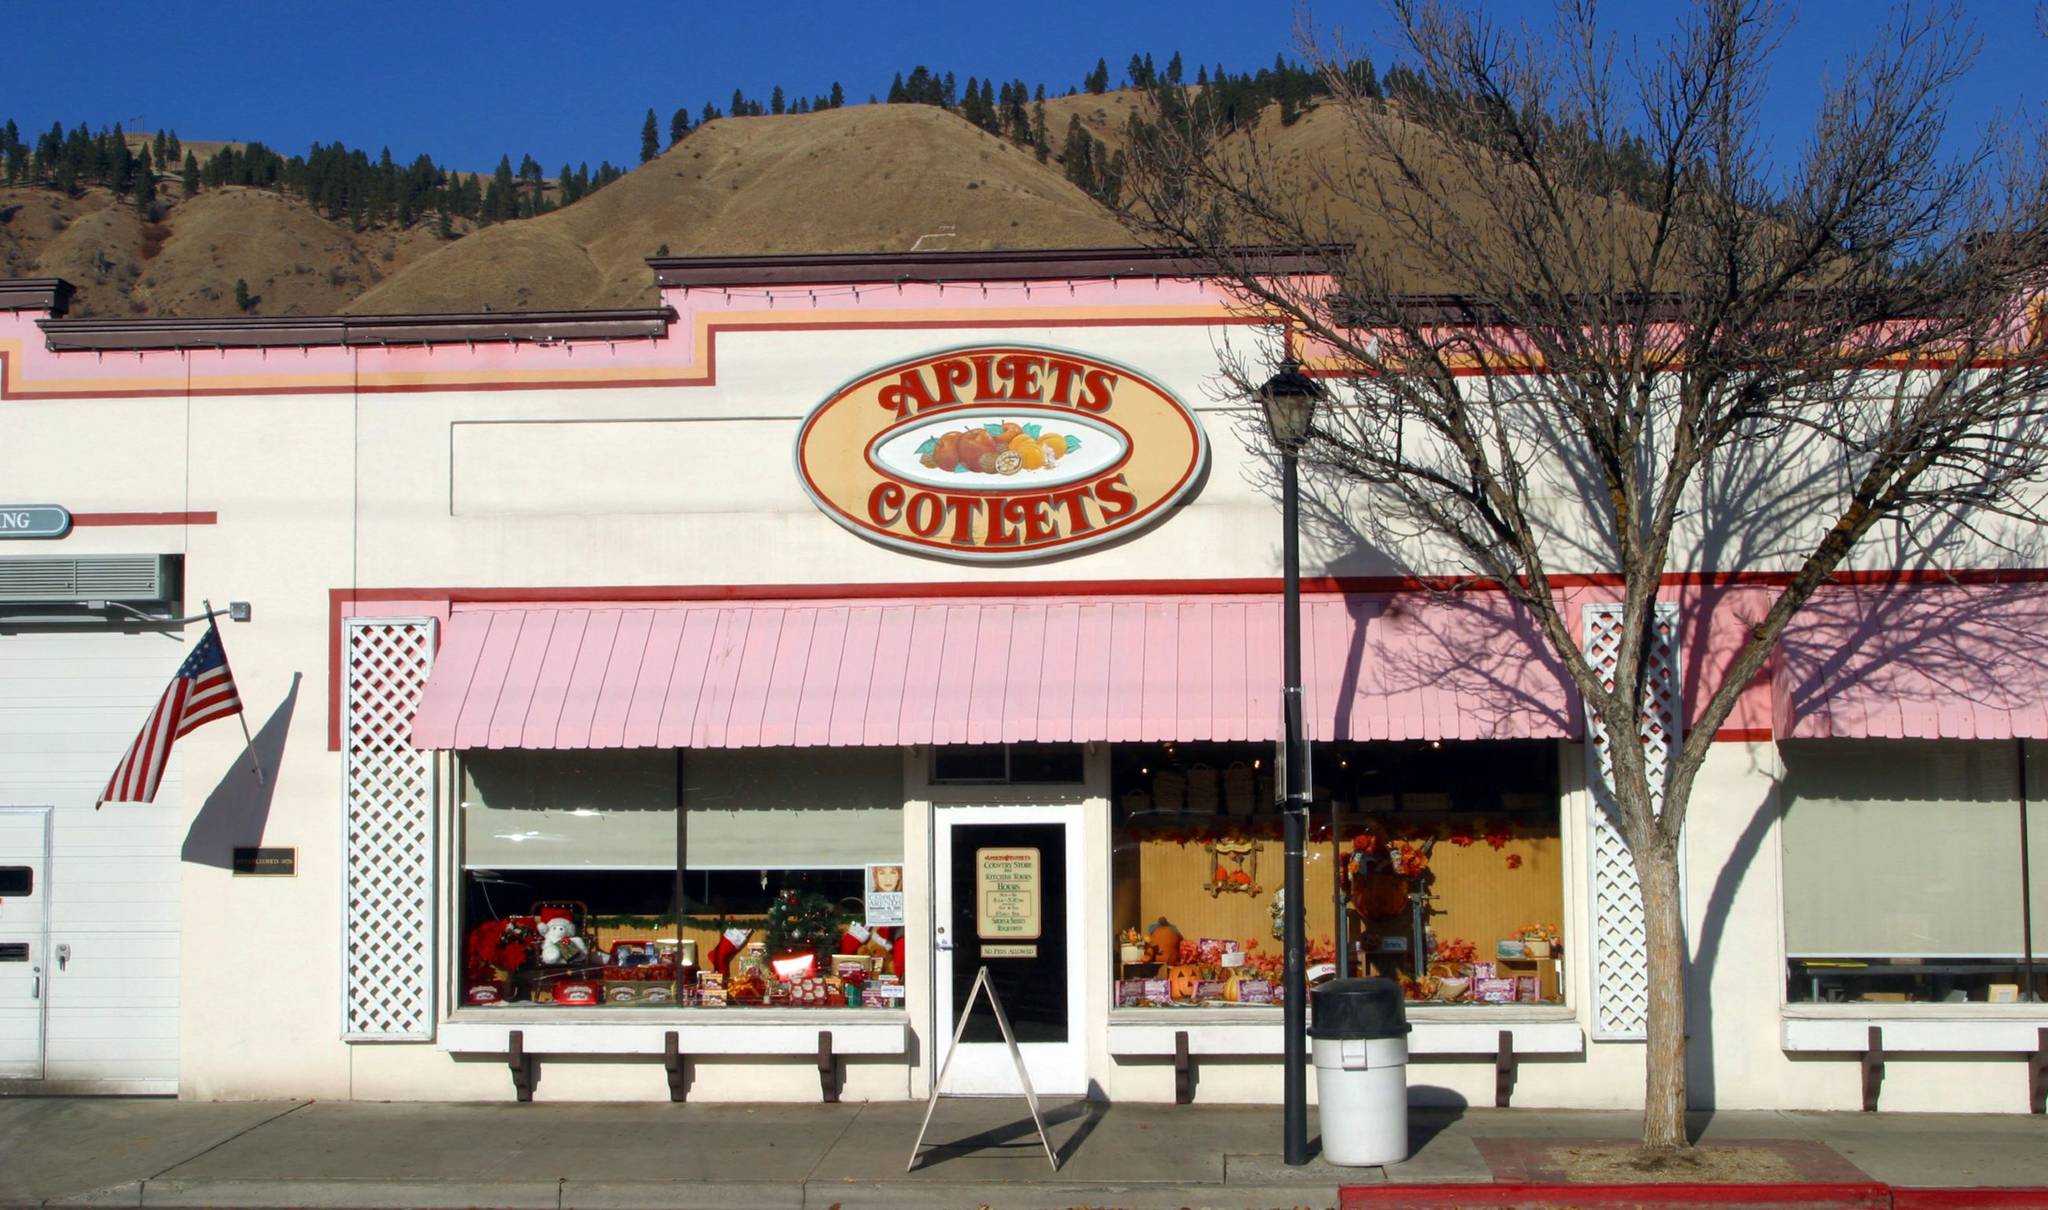 Liberty Orchards, the maker of Aplets and Cotlets fruit candies, will be closing up shop in Cashmere this spring after failing to find a buyer for the company. (Mike Siegel/Seattle Times)